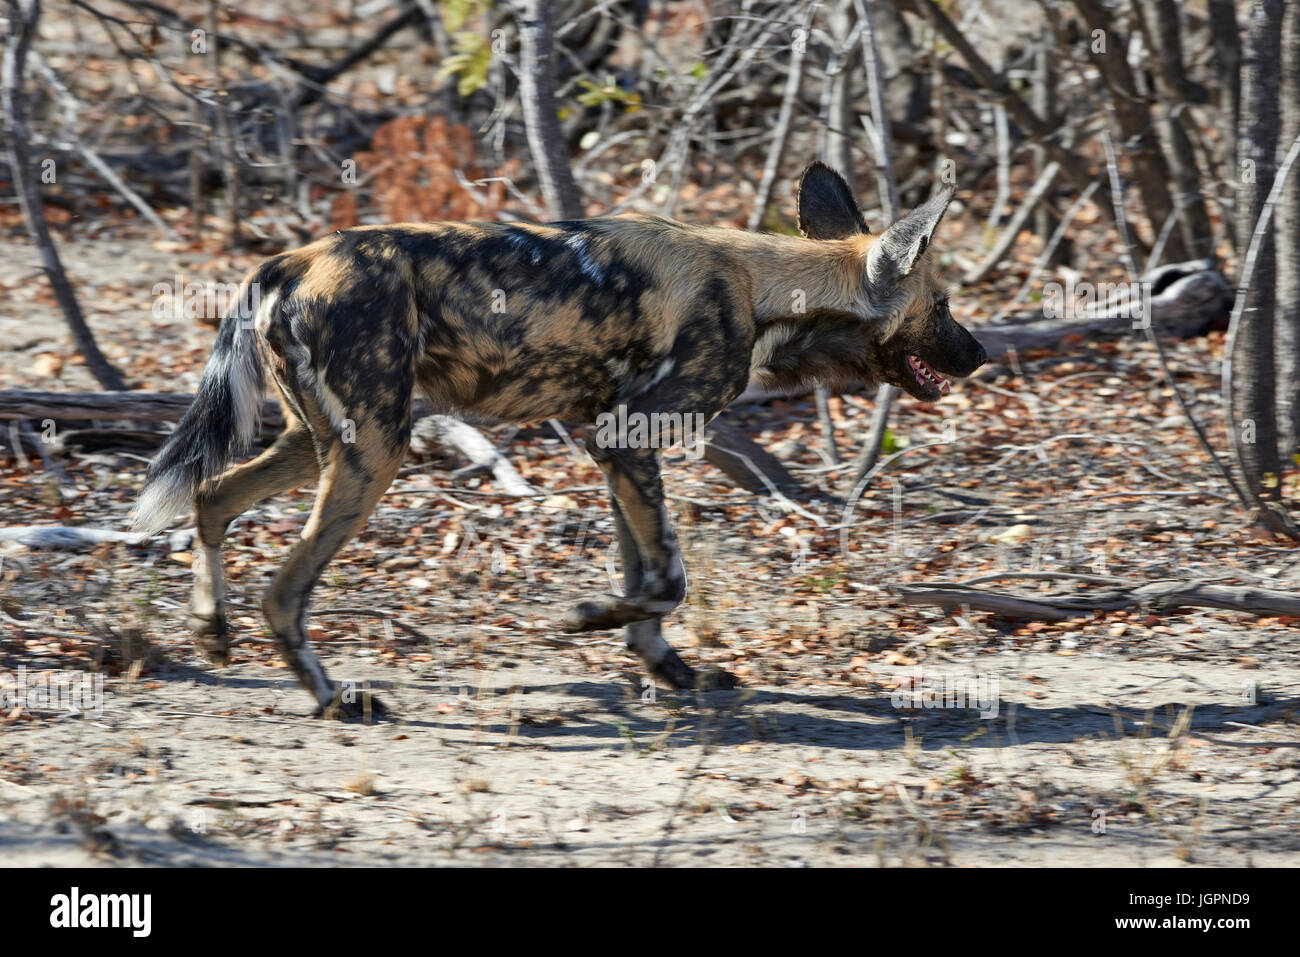 African Wild Dog, Lycoon pictus, trotting through the veld, Sabi Sands game reserve, South Africa Stock Photo